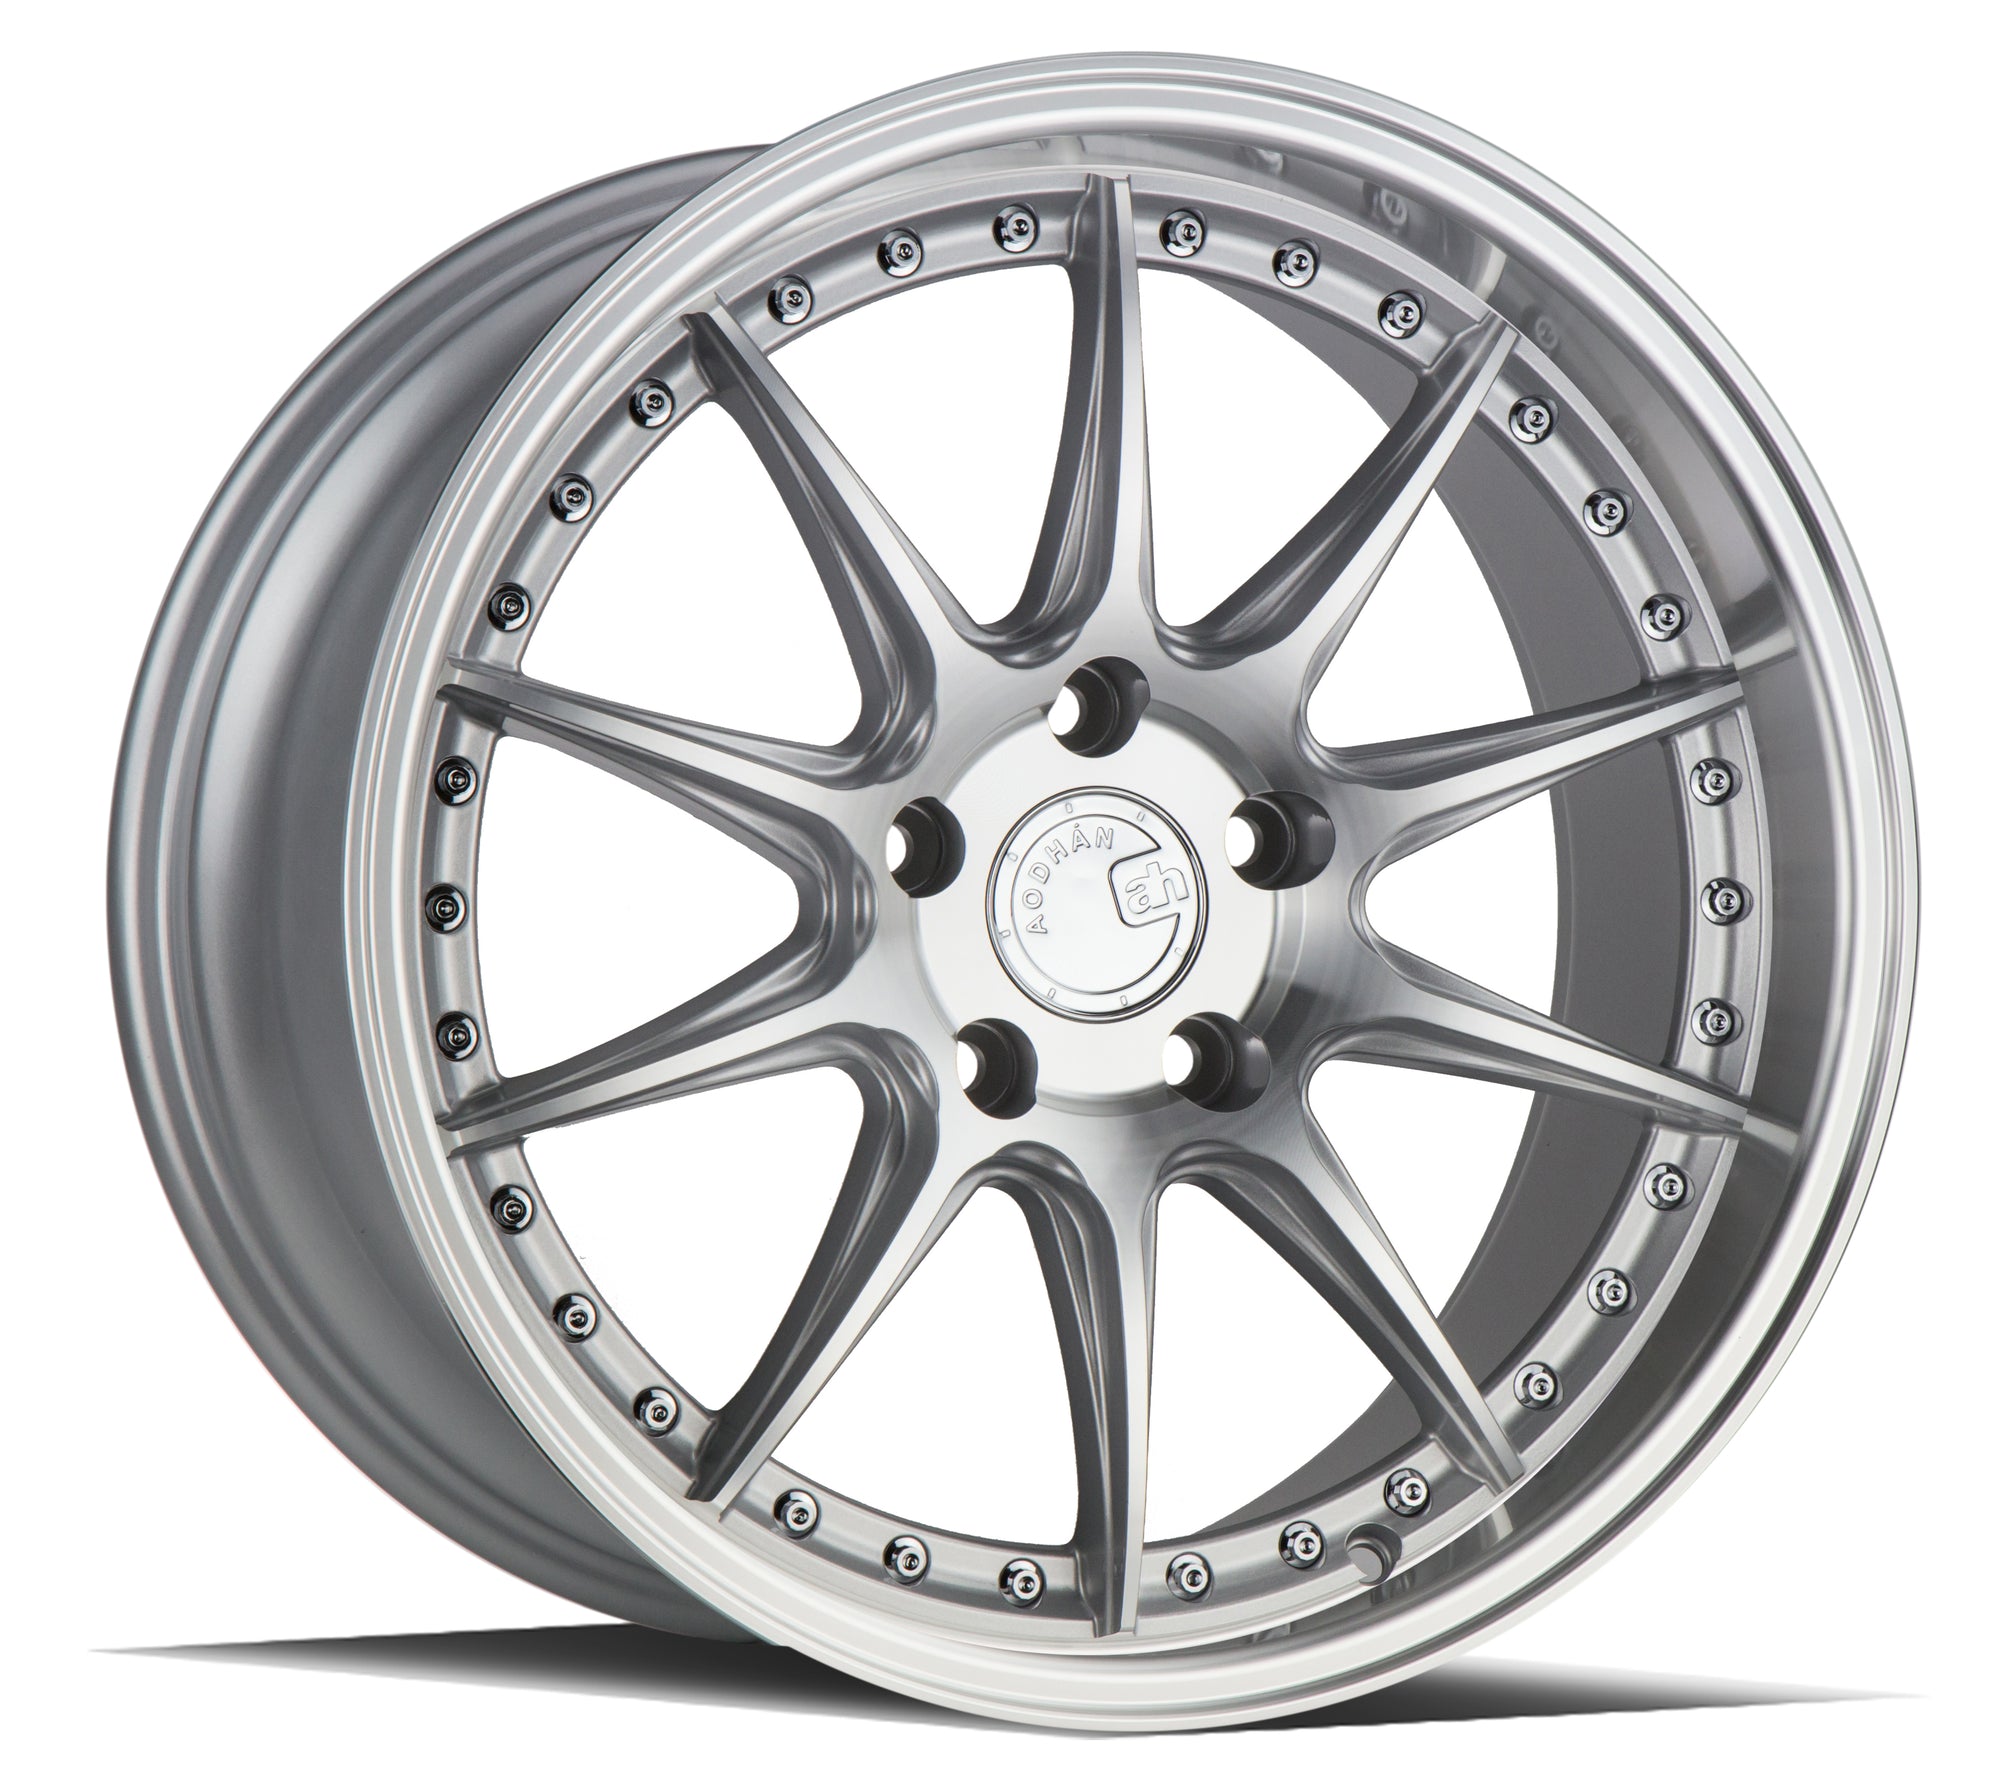 Aodhan DS07 18x9.5 5x114.3 +22 Silver w/Machined Face